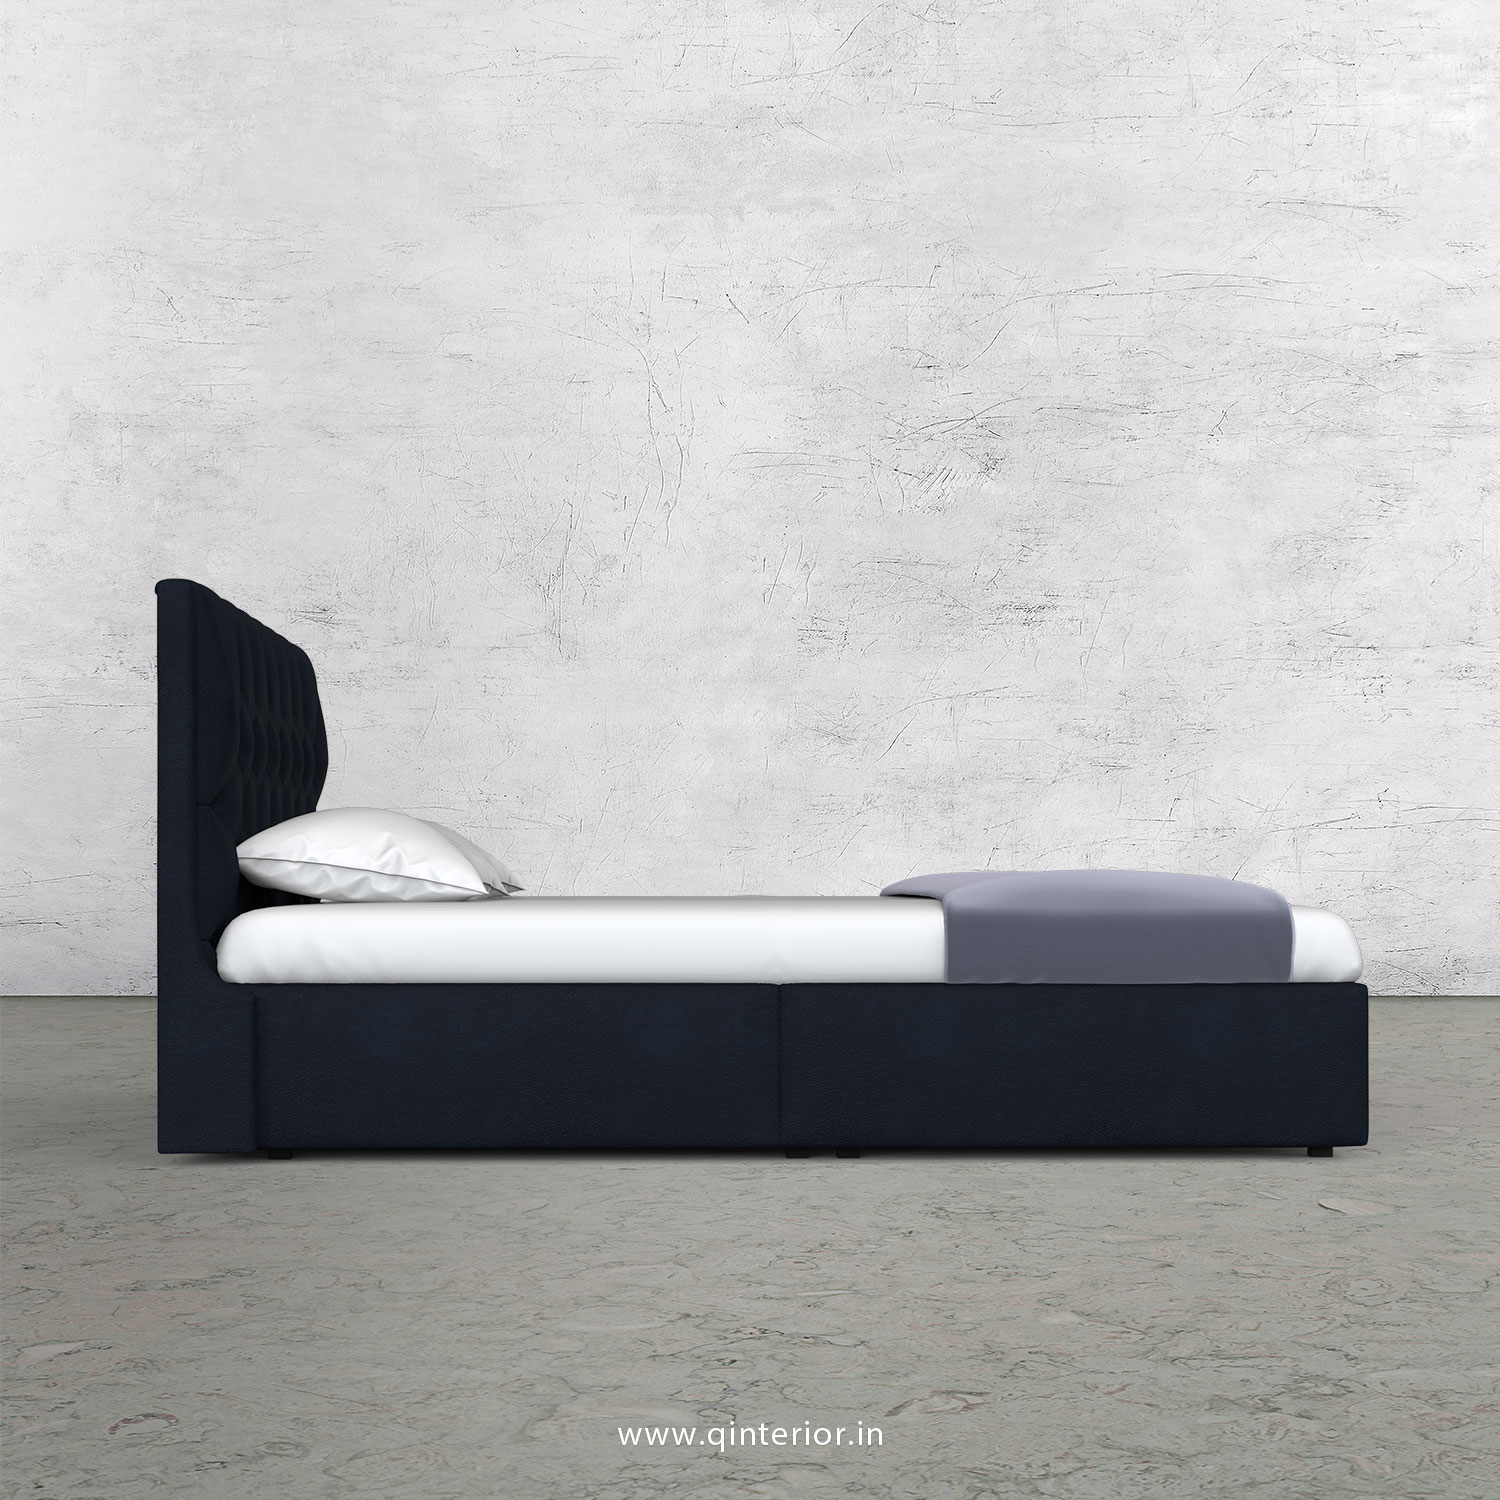 Scorpius Queen Bed in Fab Leather Fabric - QBD009 FL05